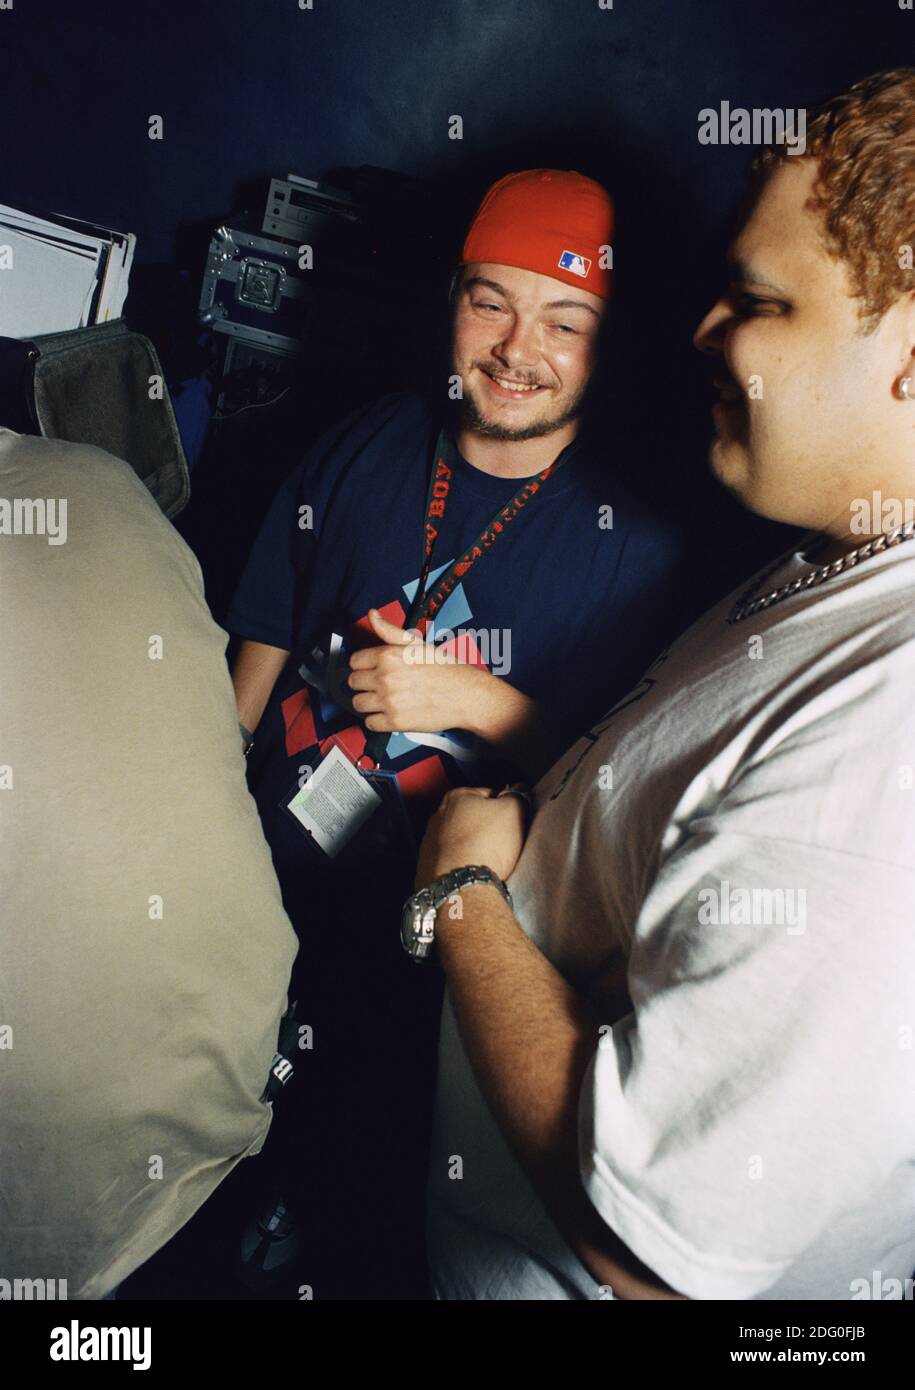 Thomas Bangalter (left) and Guy-Manuel de Homem-Christo (center) of Daft Punk, with DJ Sneak (right) at the Winter Music Conference in Miami, Florida. March 16, 1999. Stock Photo